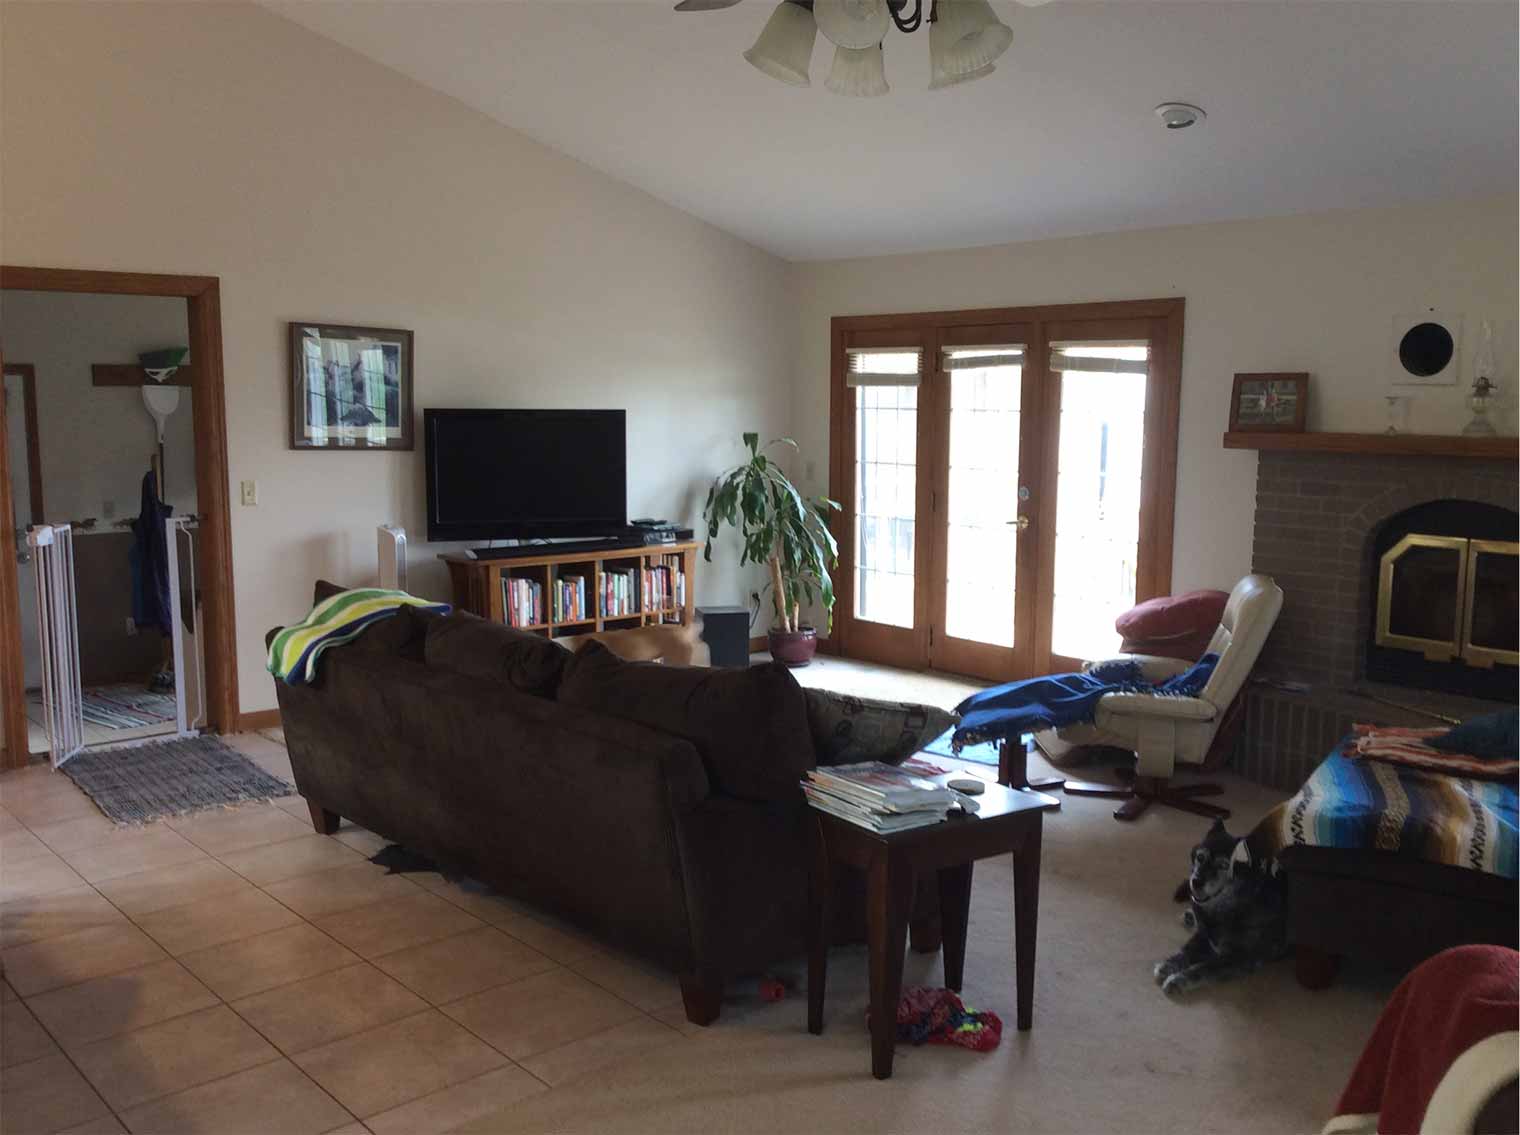 Before photo of family room to be remodeled by Silent Rivers of Des Moines to improve layout and overall floor plan of home with farmland